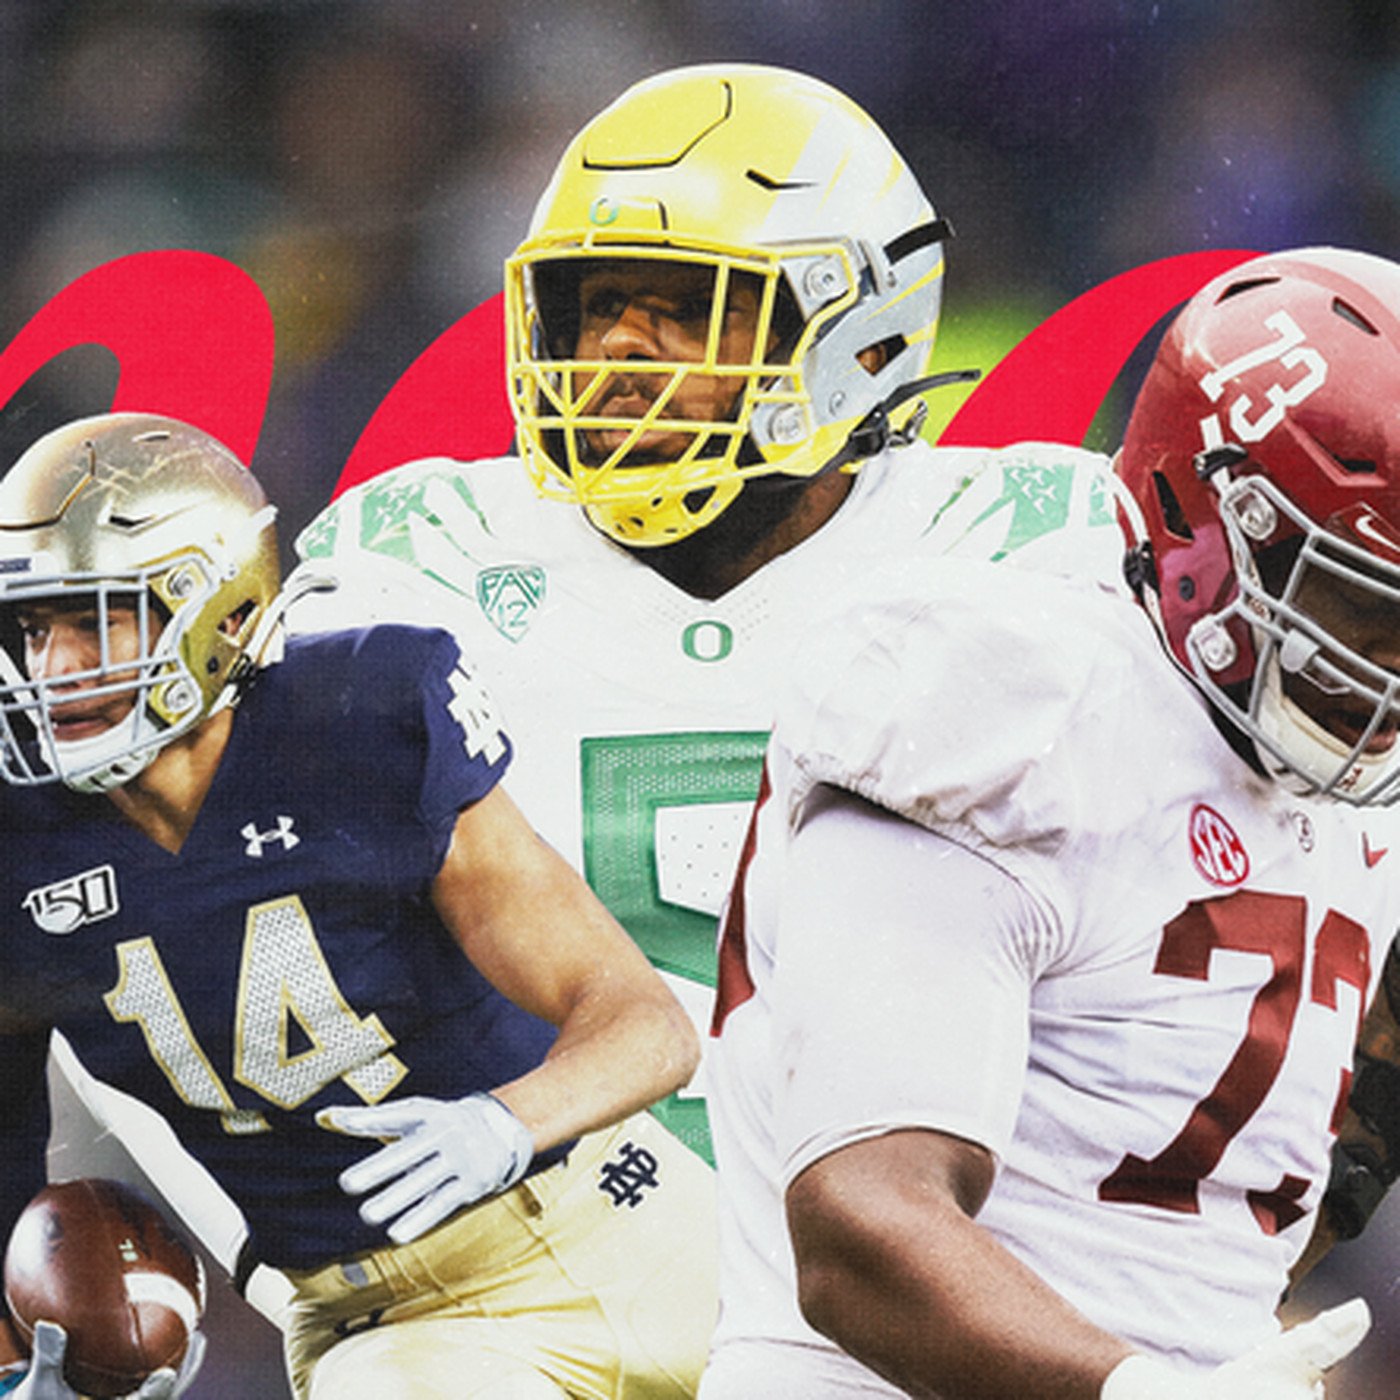 2022 NFL mock draft: New 3-round projections at regular season's end